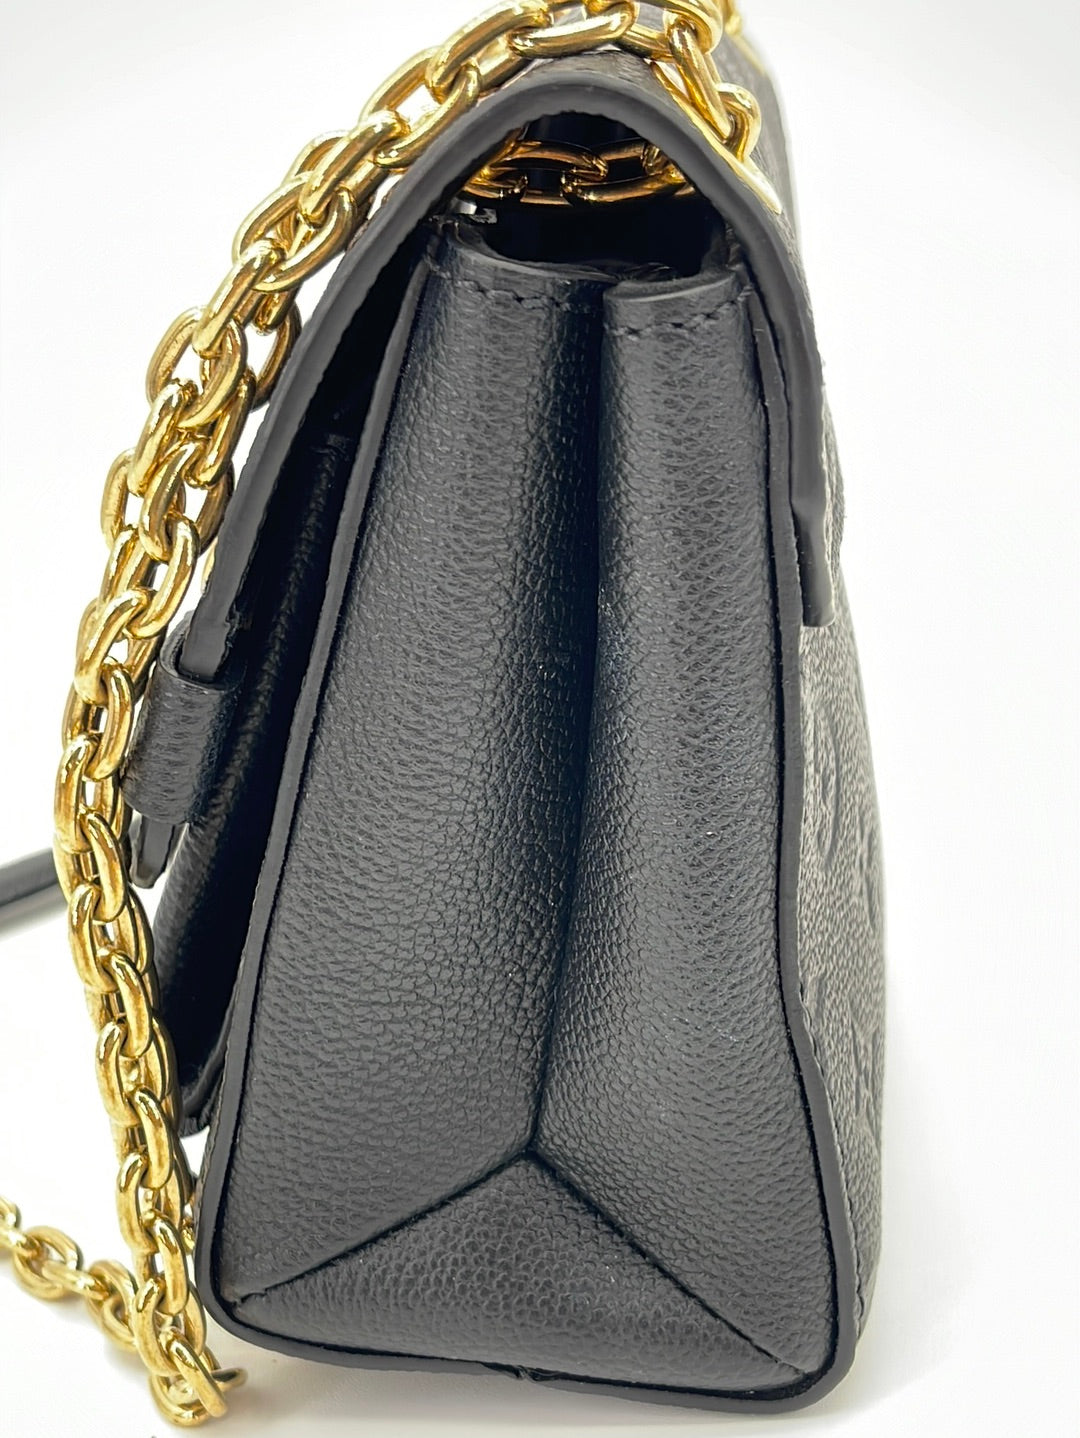 Louis Vuitton Vintage - Vernis Twist PM - Black - Vernis Leather and Leather  Pouch - Luxury High Quality - Avvenice